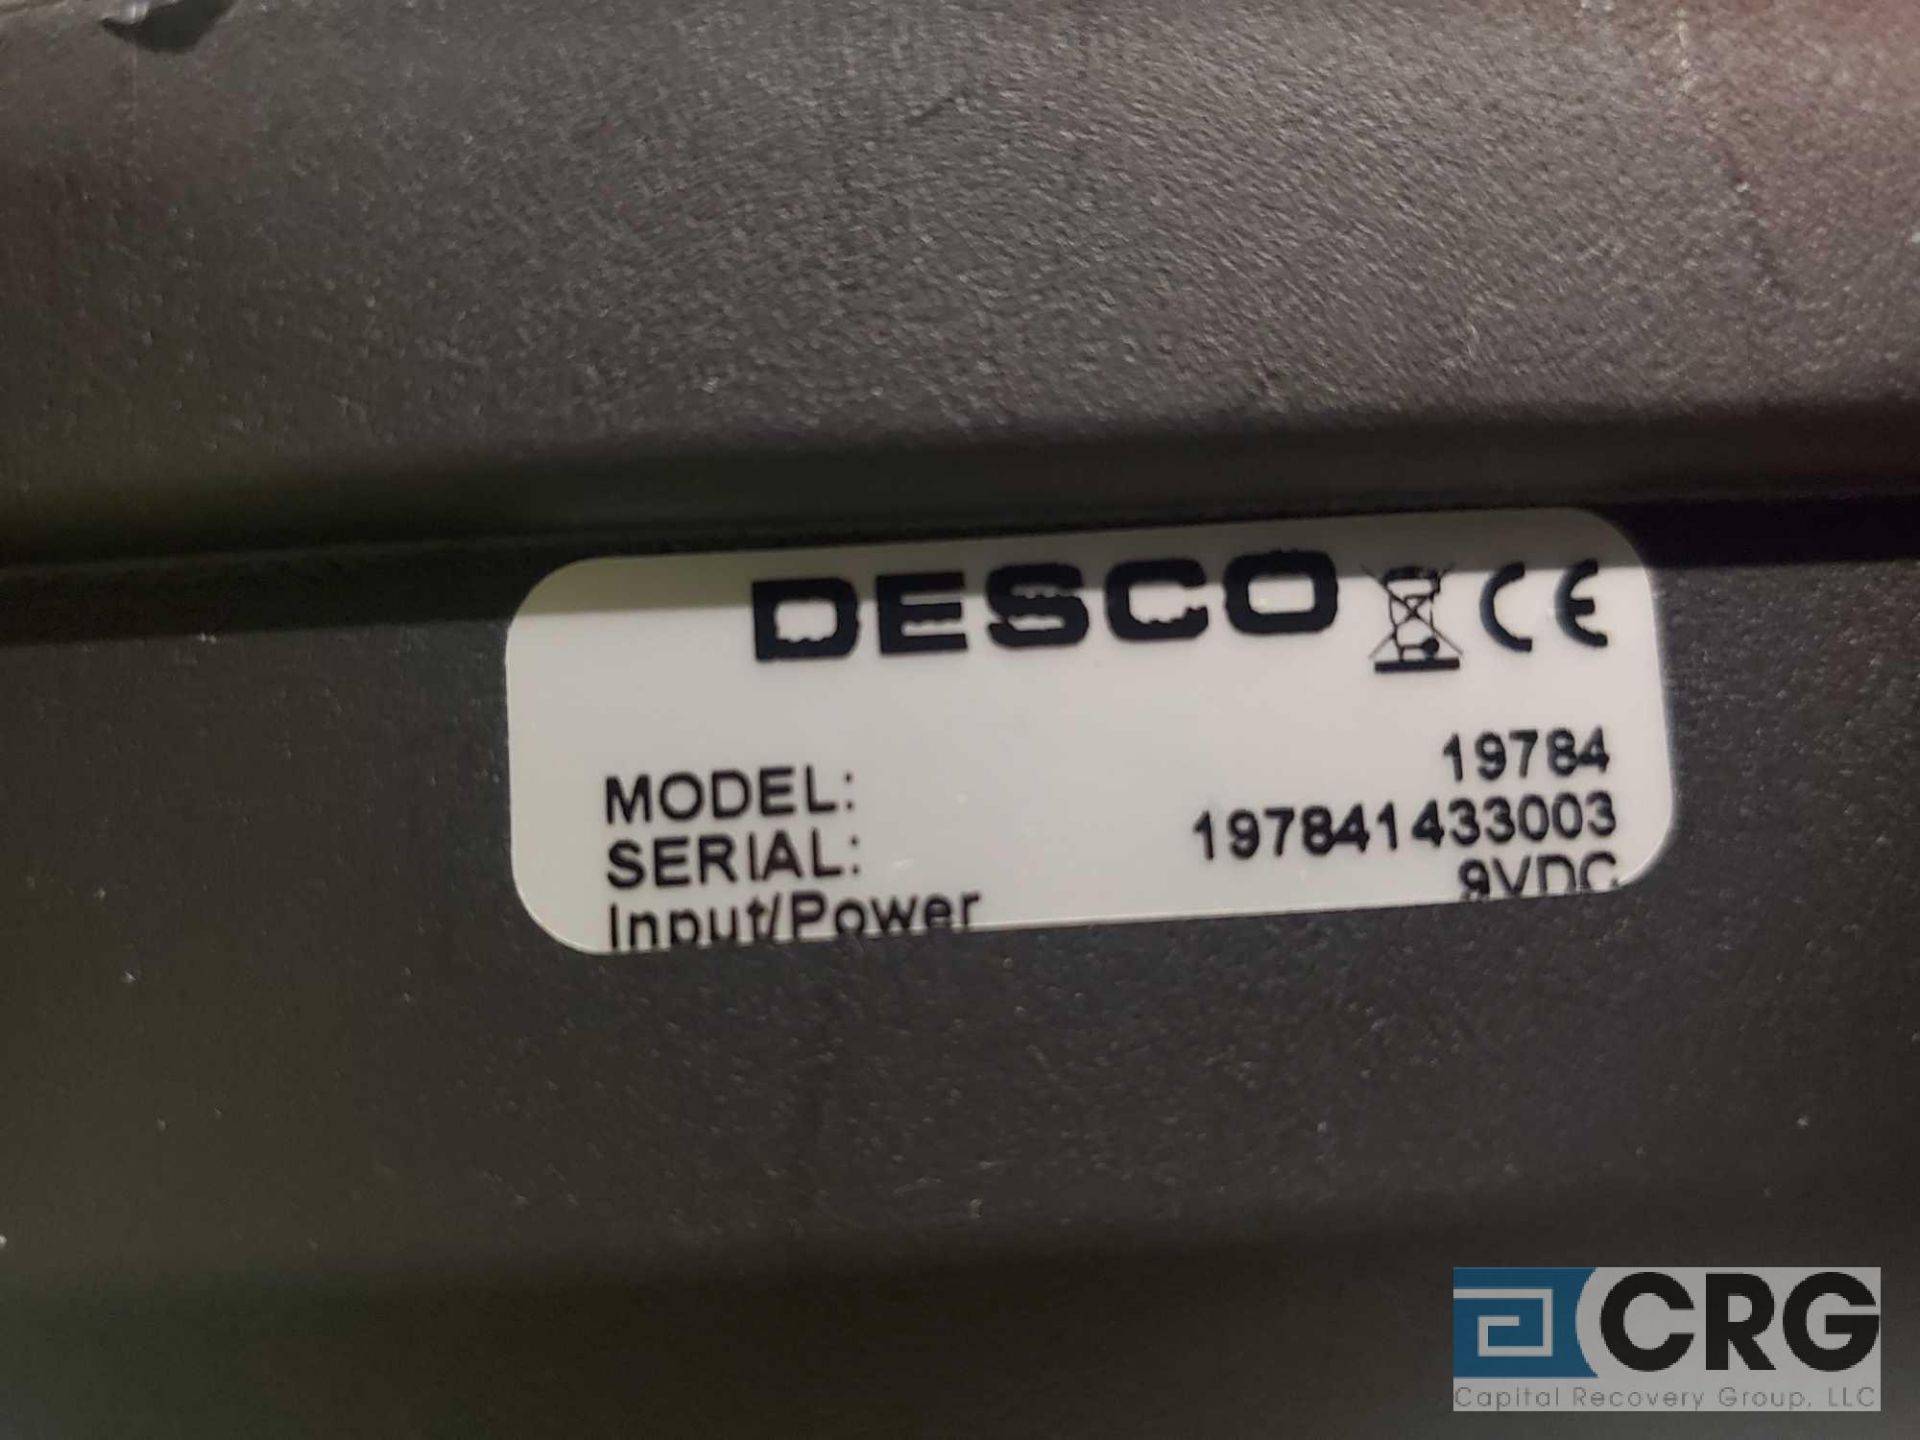 Desco 19794 surface resistance test kit with case - Image 2 of 2